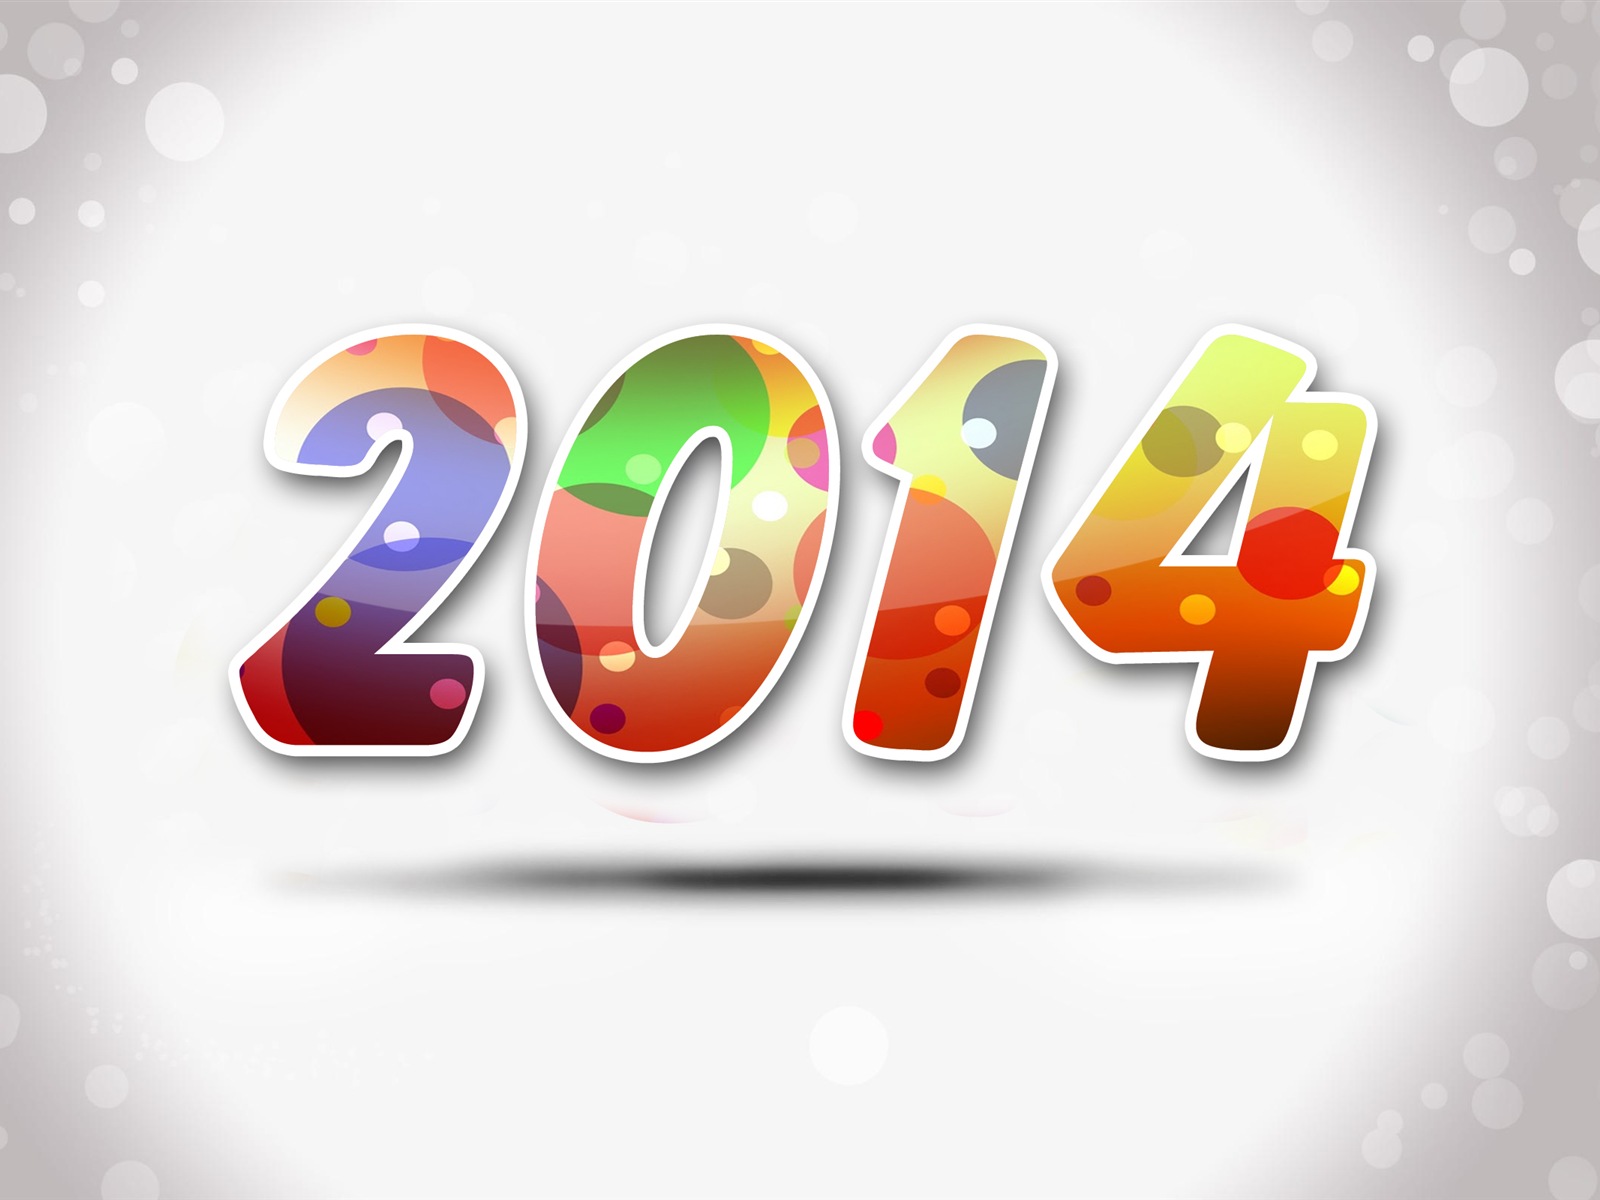 2014 New Year Theme HD Wallpapers (2) #17 - 1600x1200